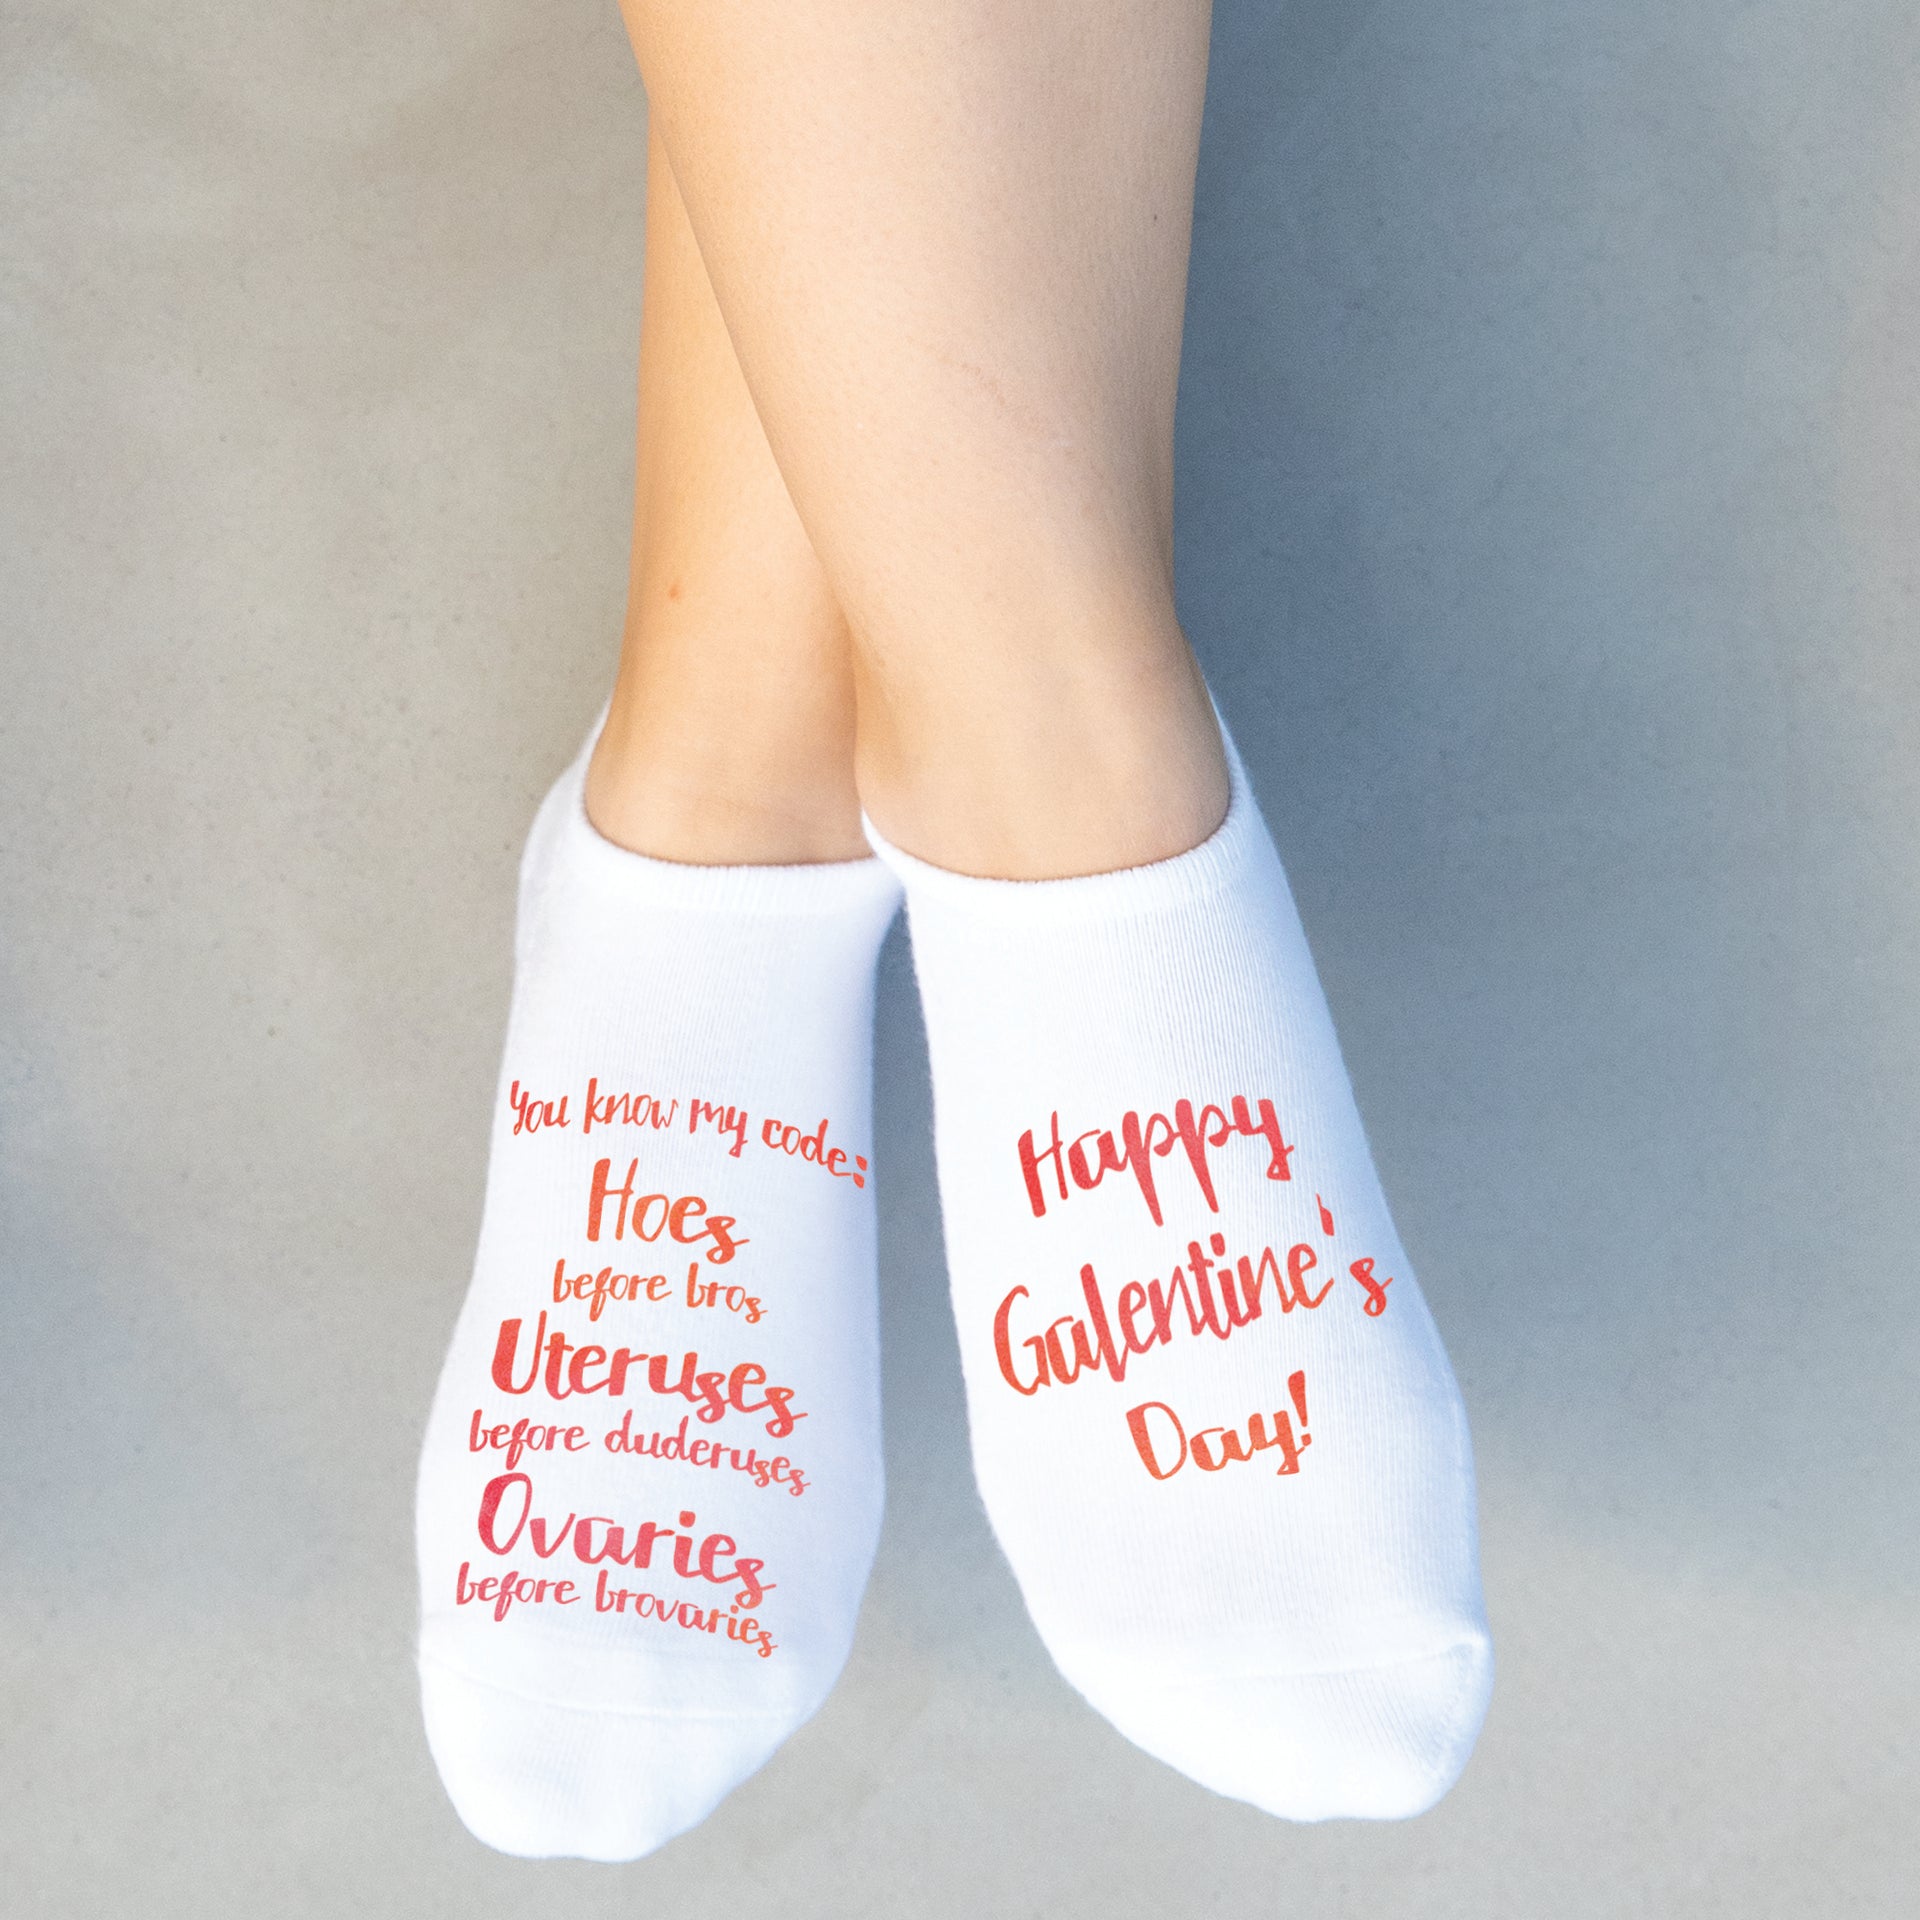 Cute socks for Galentine's Day - fun to wear and share with your favorite girls!